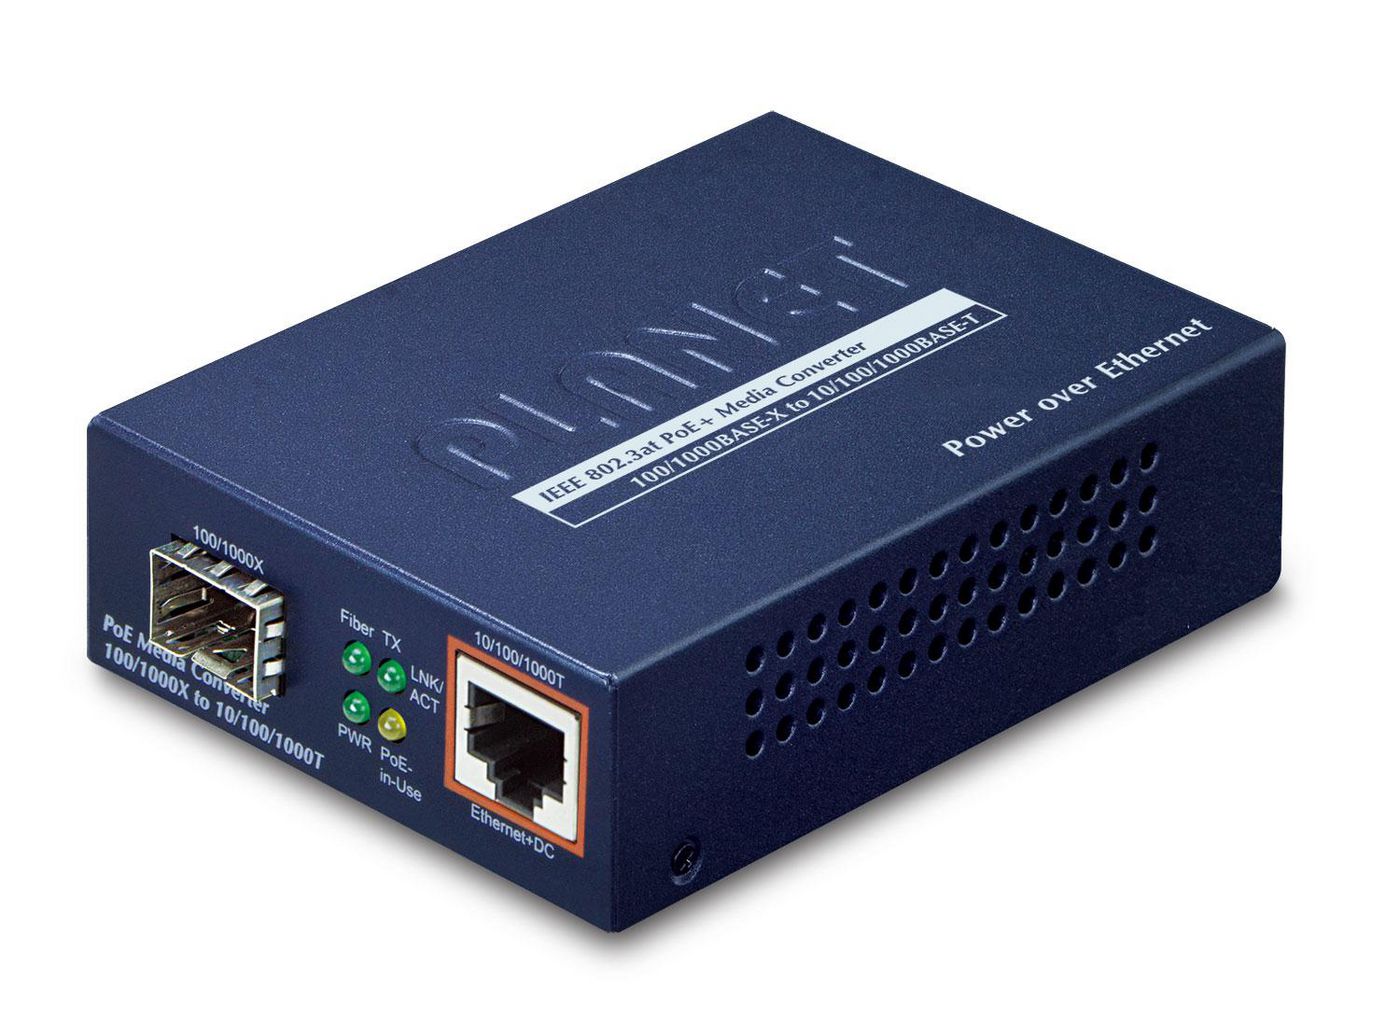 Planet GTP-805A IEEE802.3afat PoE 101001000 